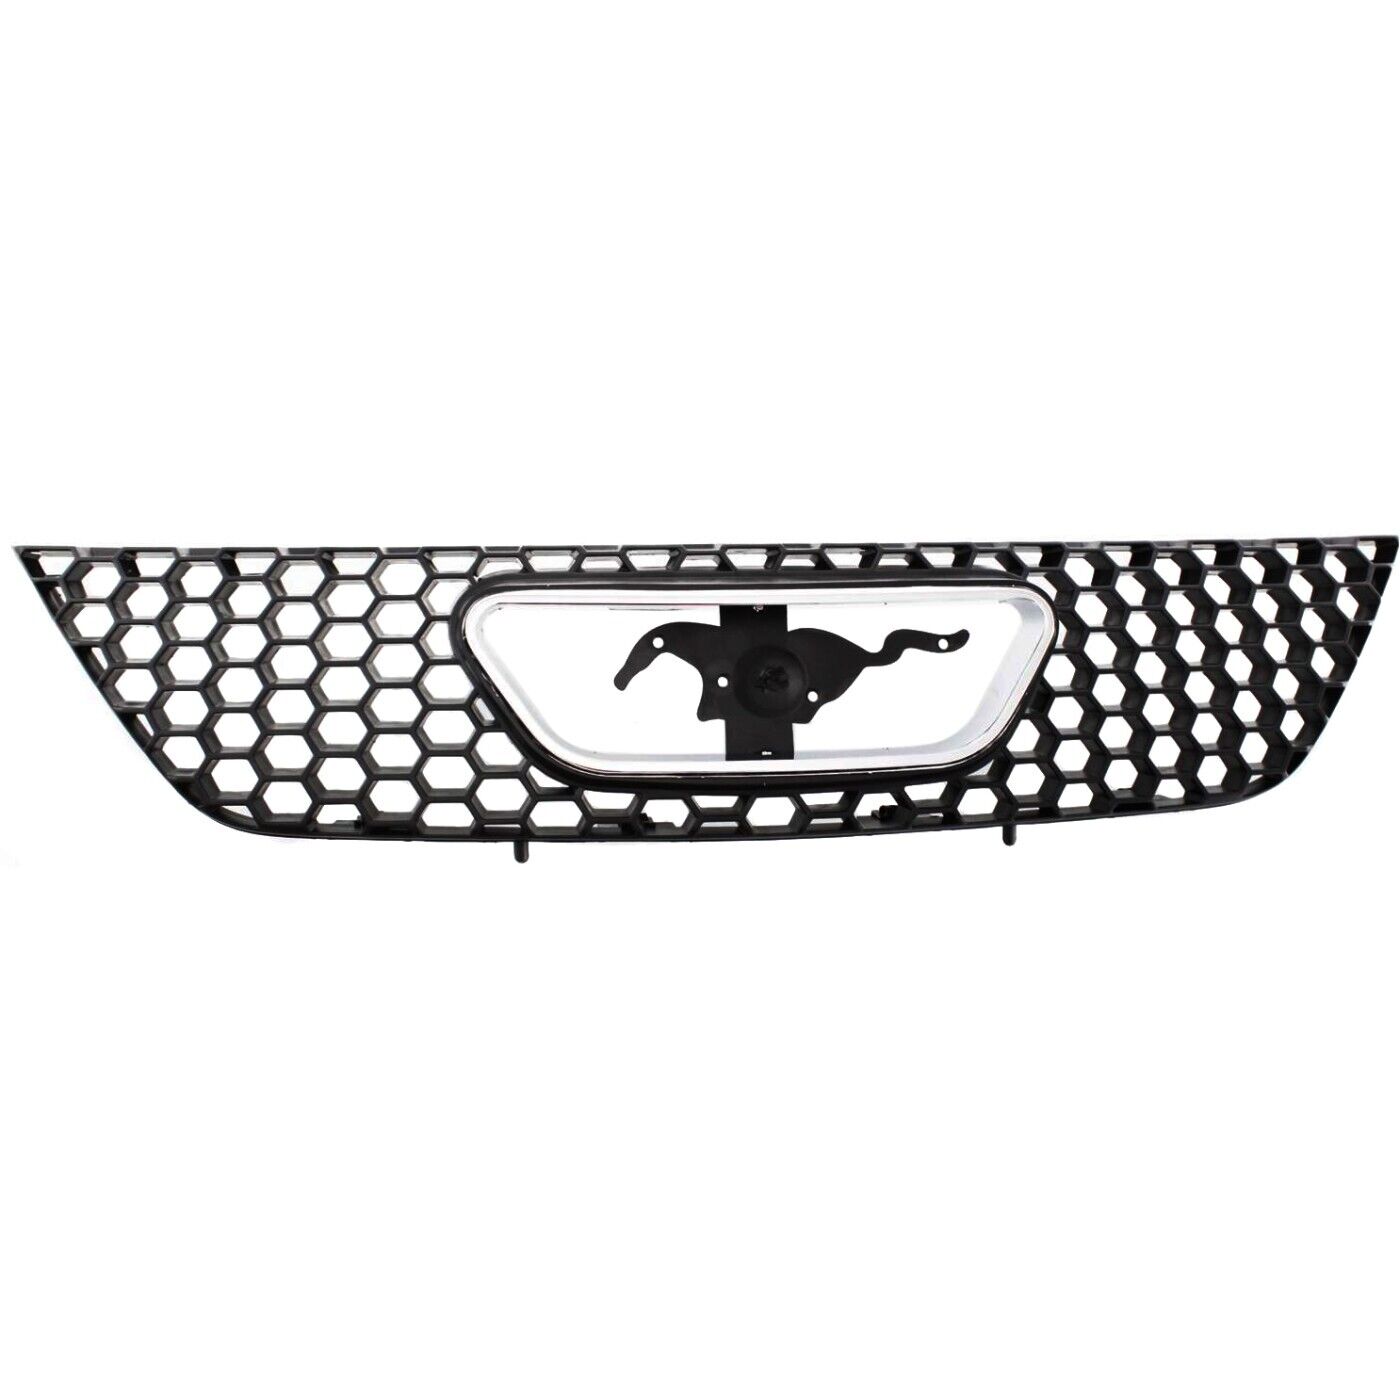 Grille For 99-2004 Ford Mustang Textured Black Plastic